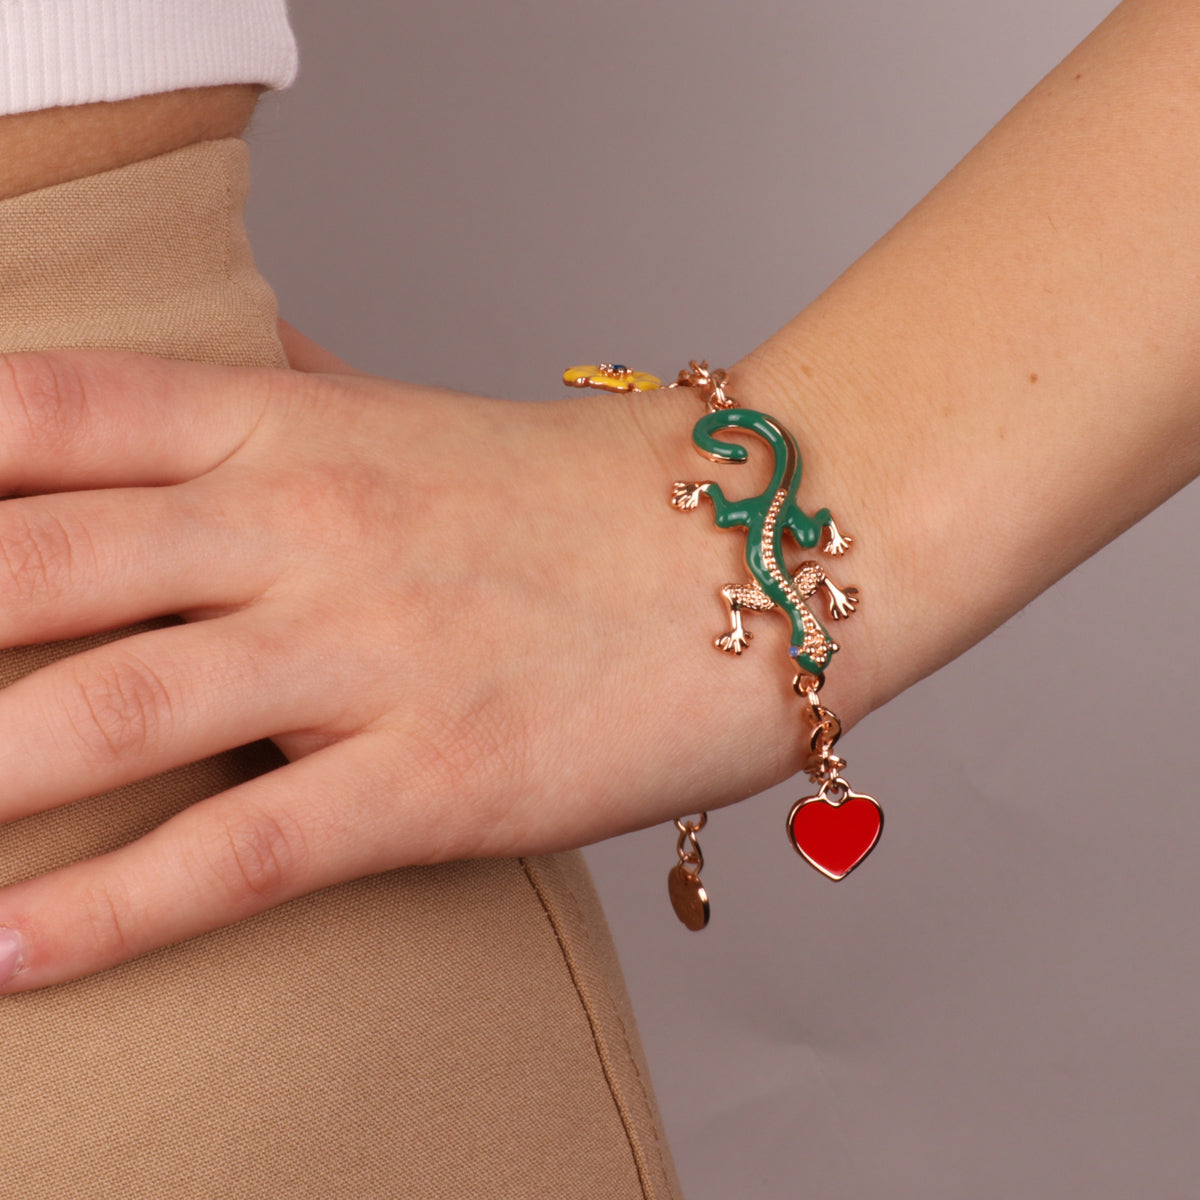 Metal bracelet with green geco, red heart and yellow flower